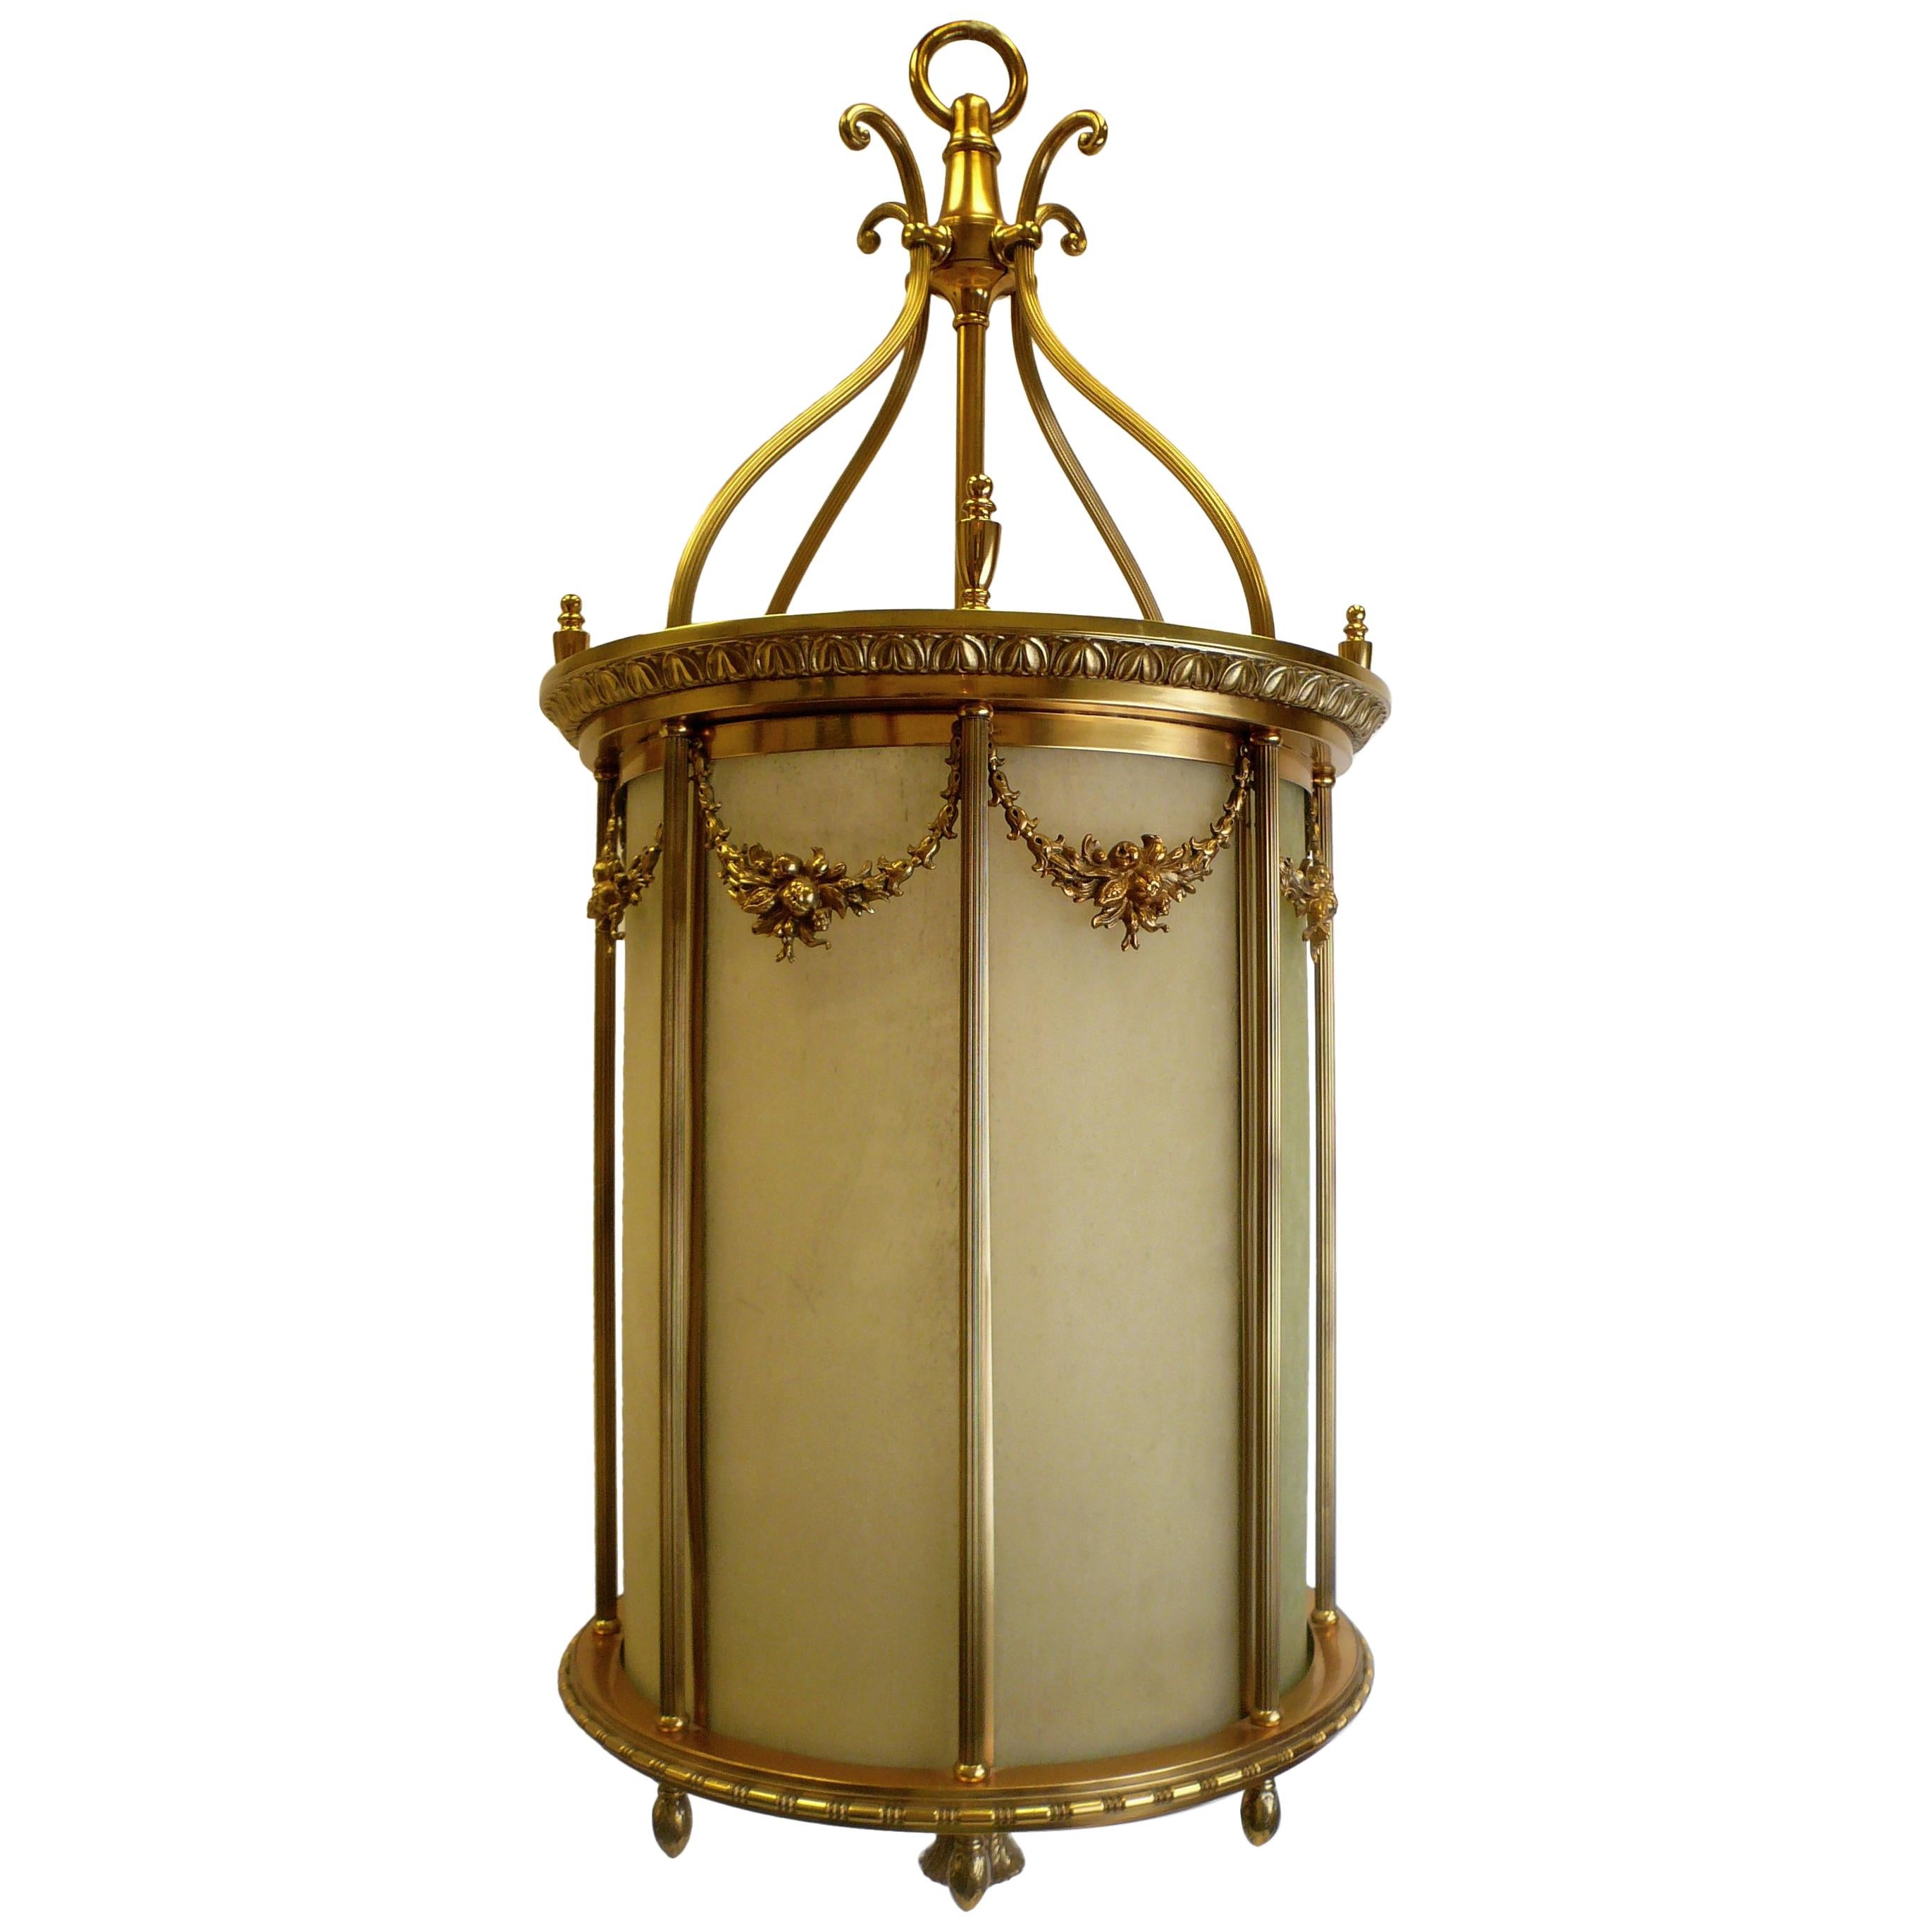 Large Gilt Bronze and Leaded Glass Neoclassical Style Lantern